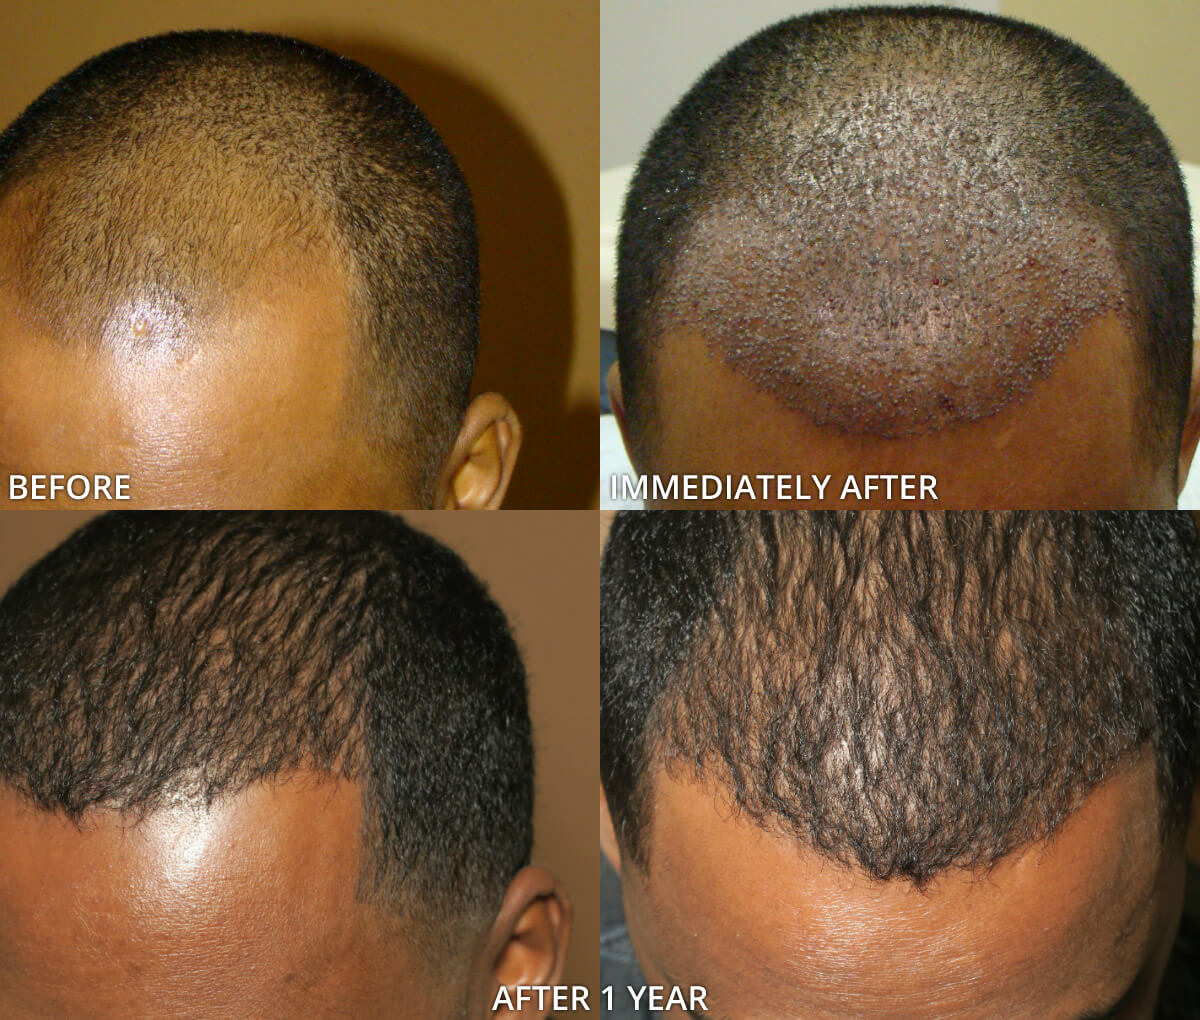 FUE Hair Transplantation – Before and After Pictures * | Dr Turowski